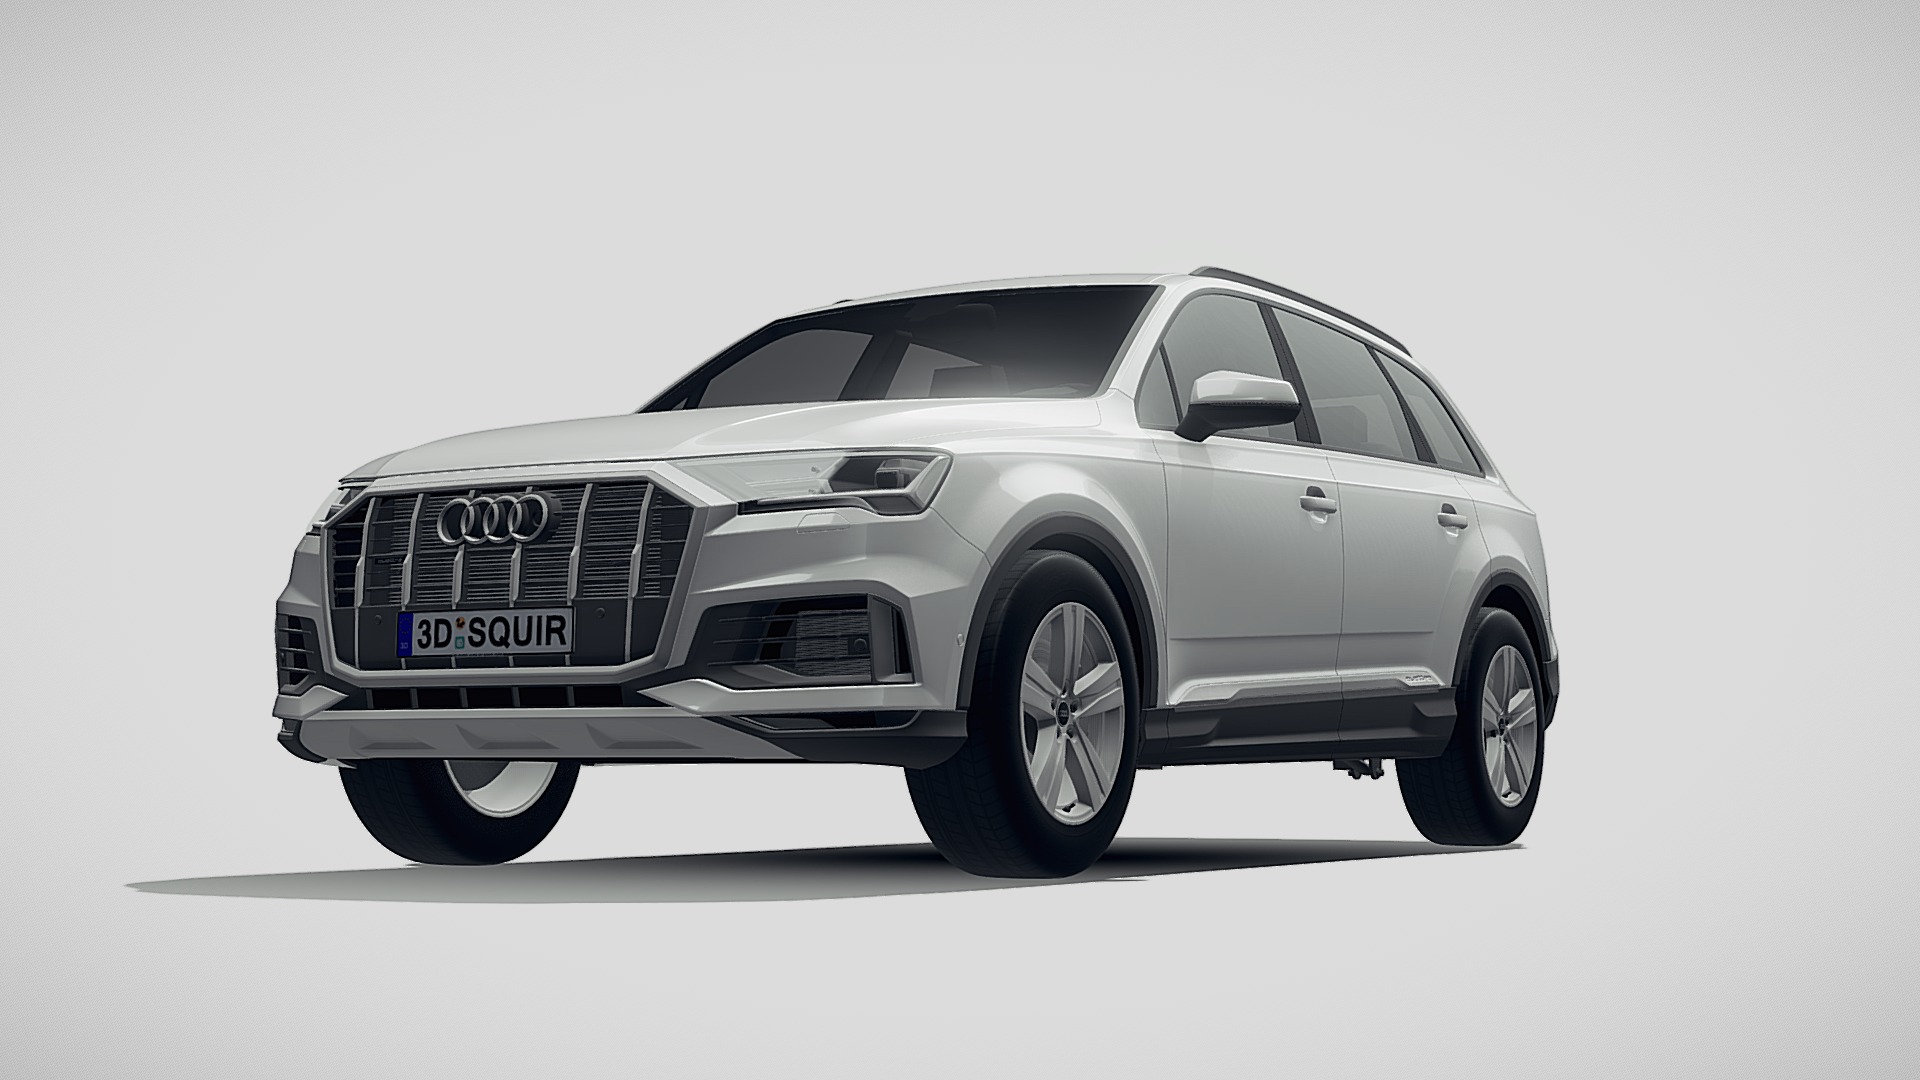 3D model Audi Q7 Basic 2020 - This is a 3D model of the Audi Q7 Basic 2020. The 3D model is about a silver car with a black grill.